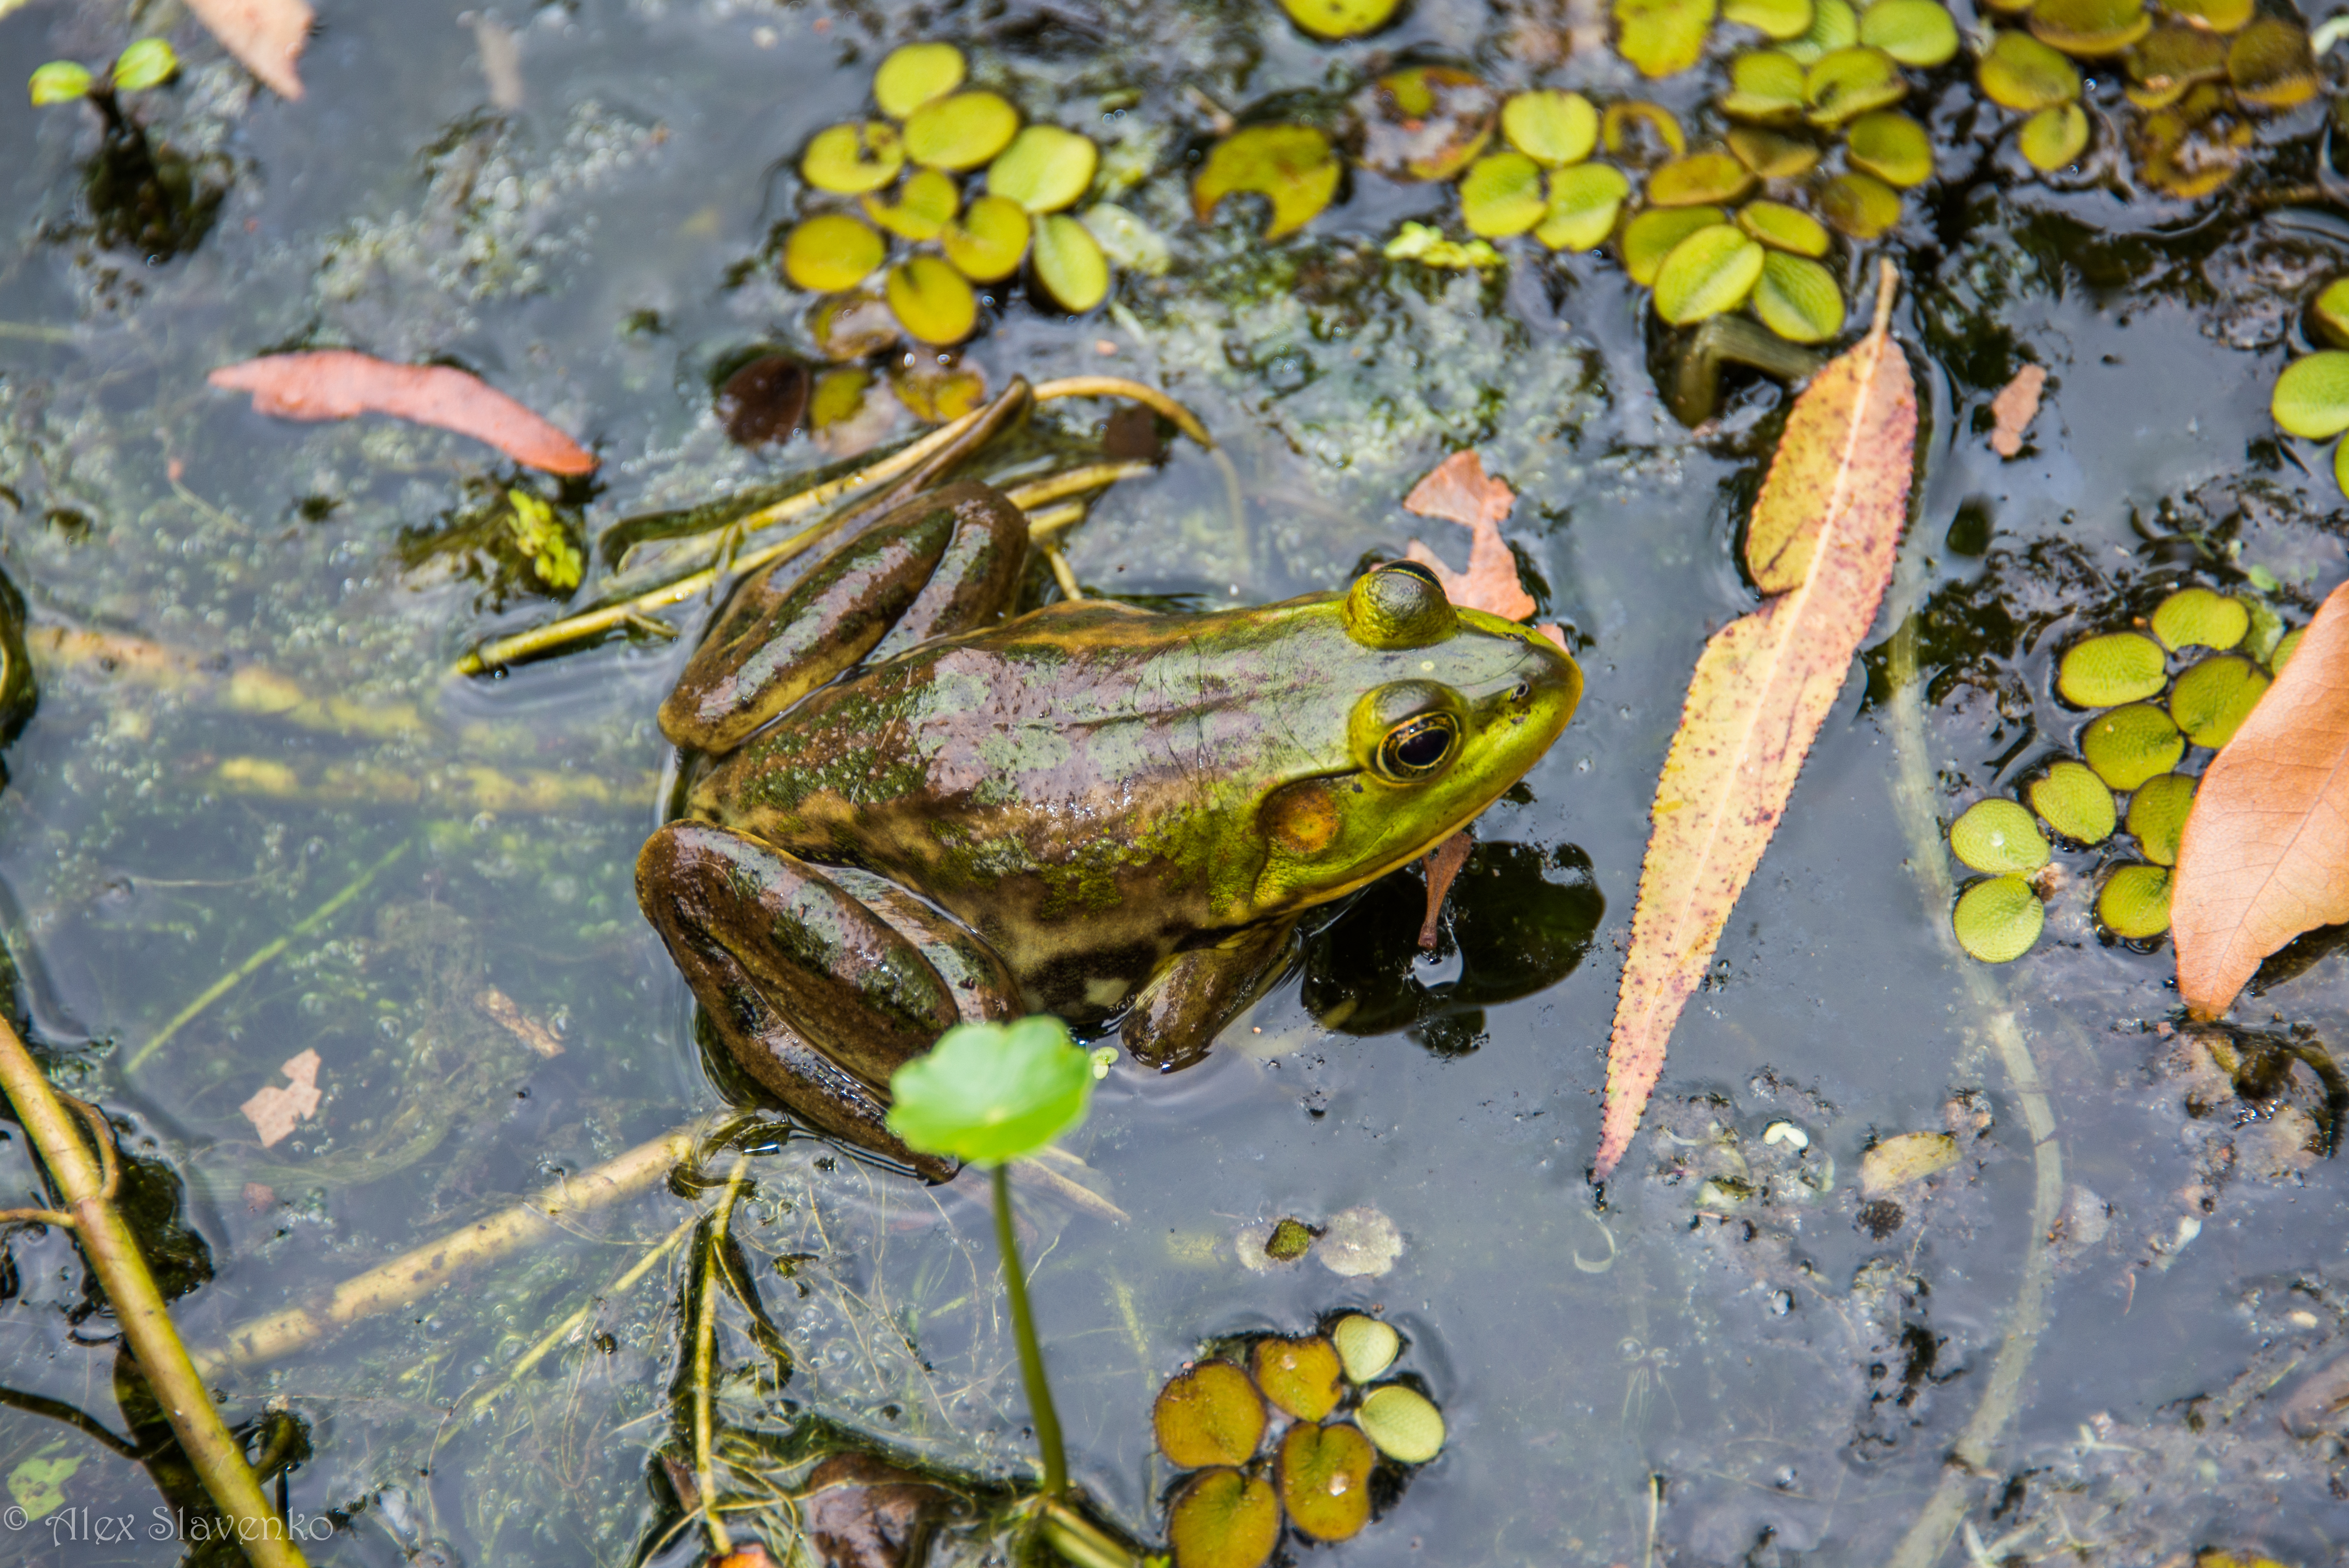 A green and brown frog rests in shallow water